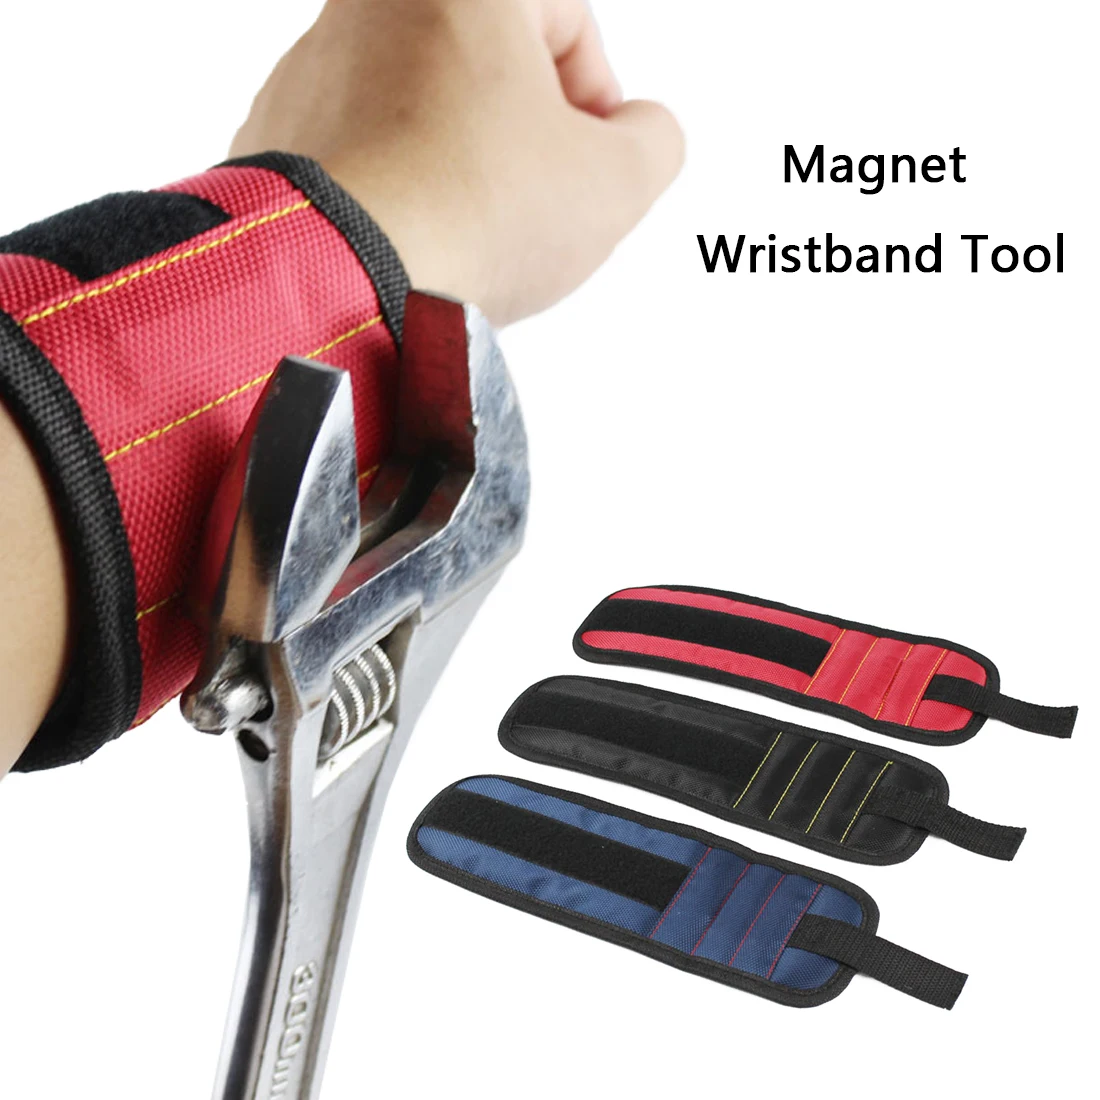 

Magnetic Wristband Strong Magnets Oxford Cloth Pocket Wrist Tool Pouch Bag Screws Drill Electrician Tools Bag For Holding Screws